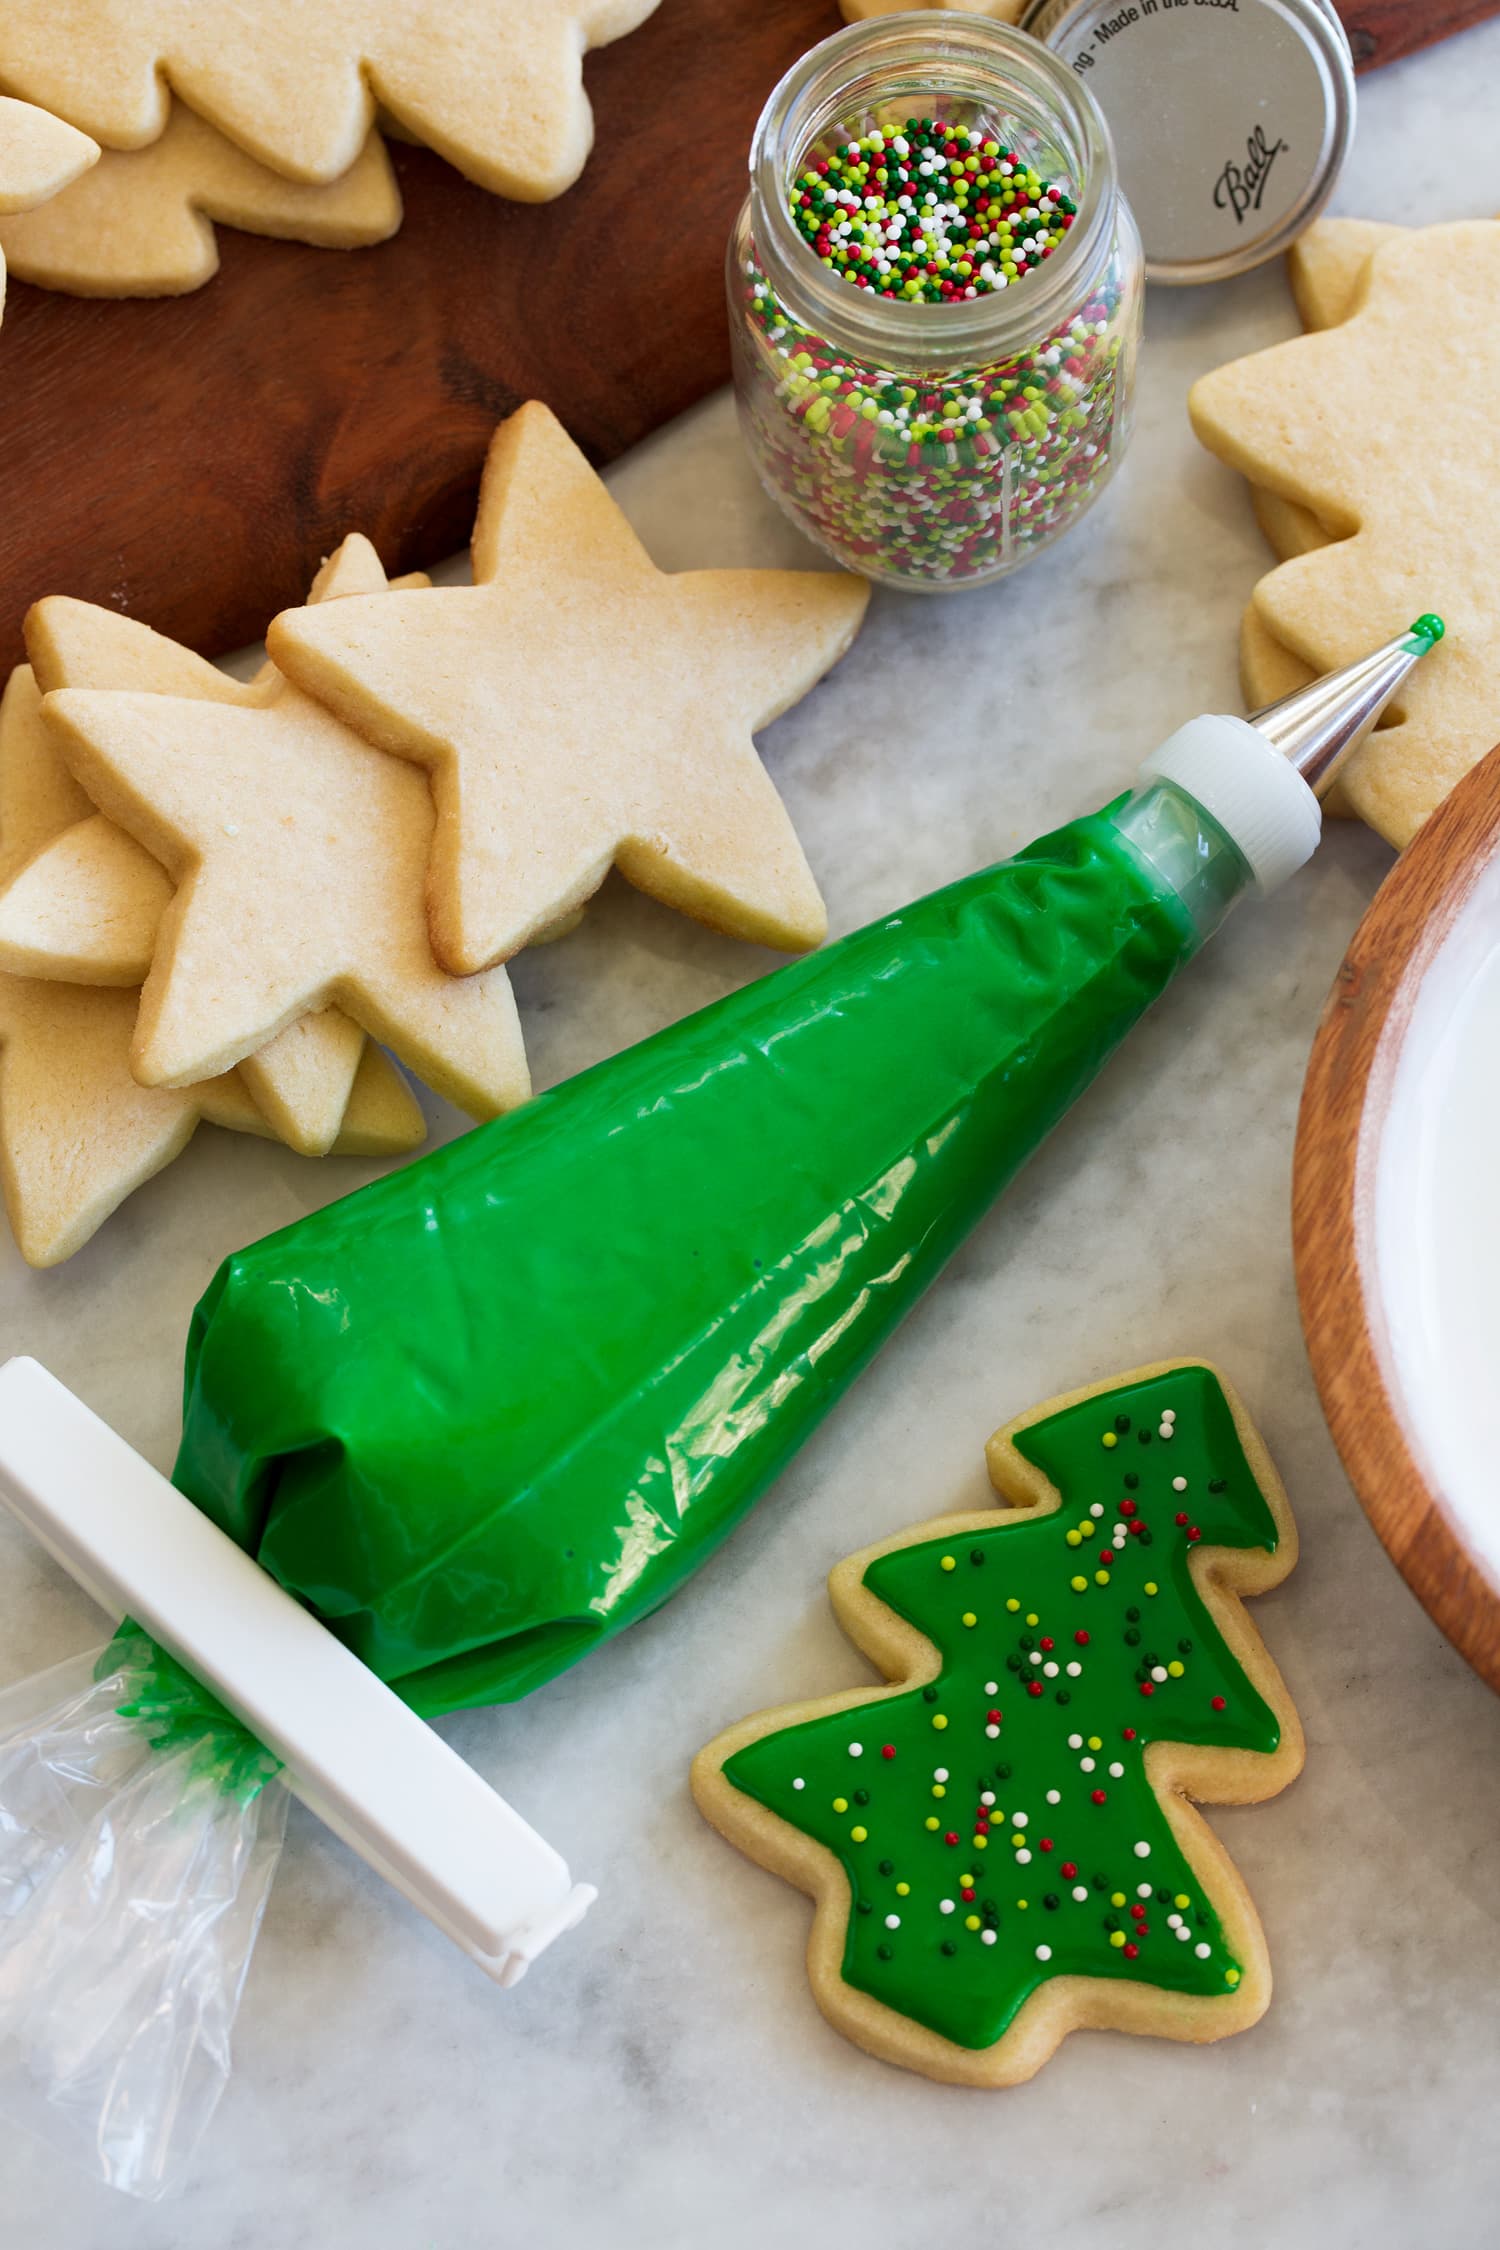 Sugar cookie icing in a piping bag. Icing is tinted a green color and there is a cut out cookie next to it showing how to decorate with icing and sprinkles.